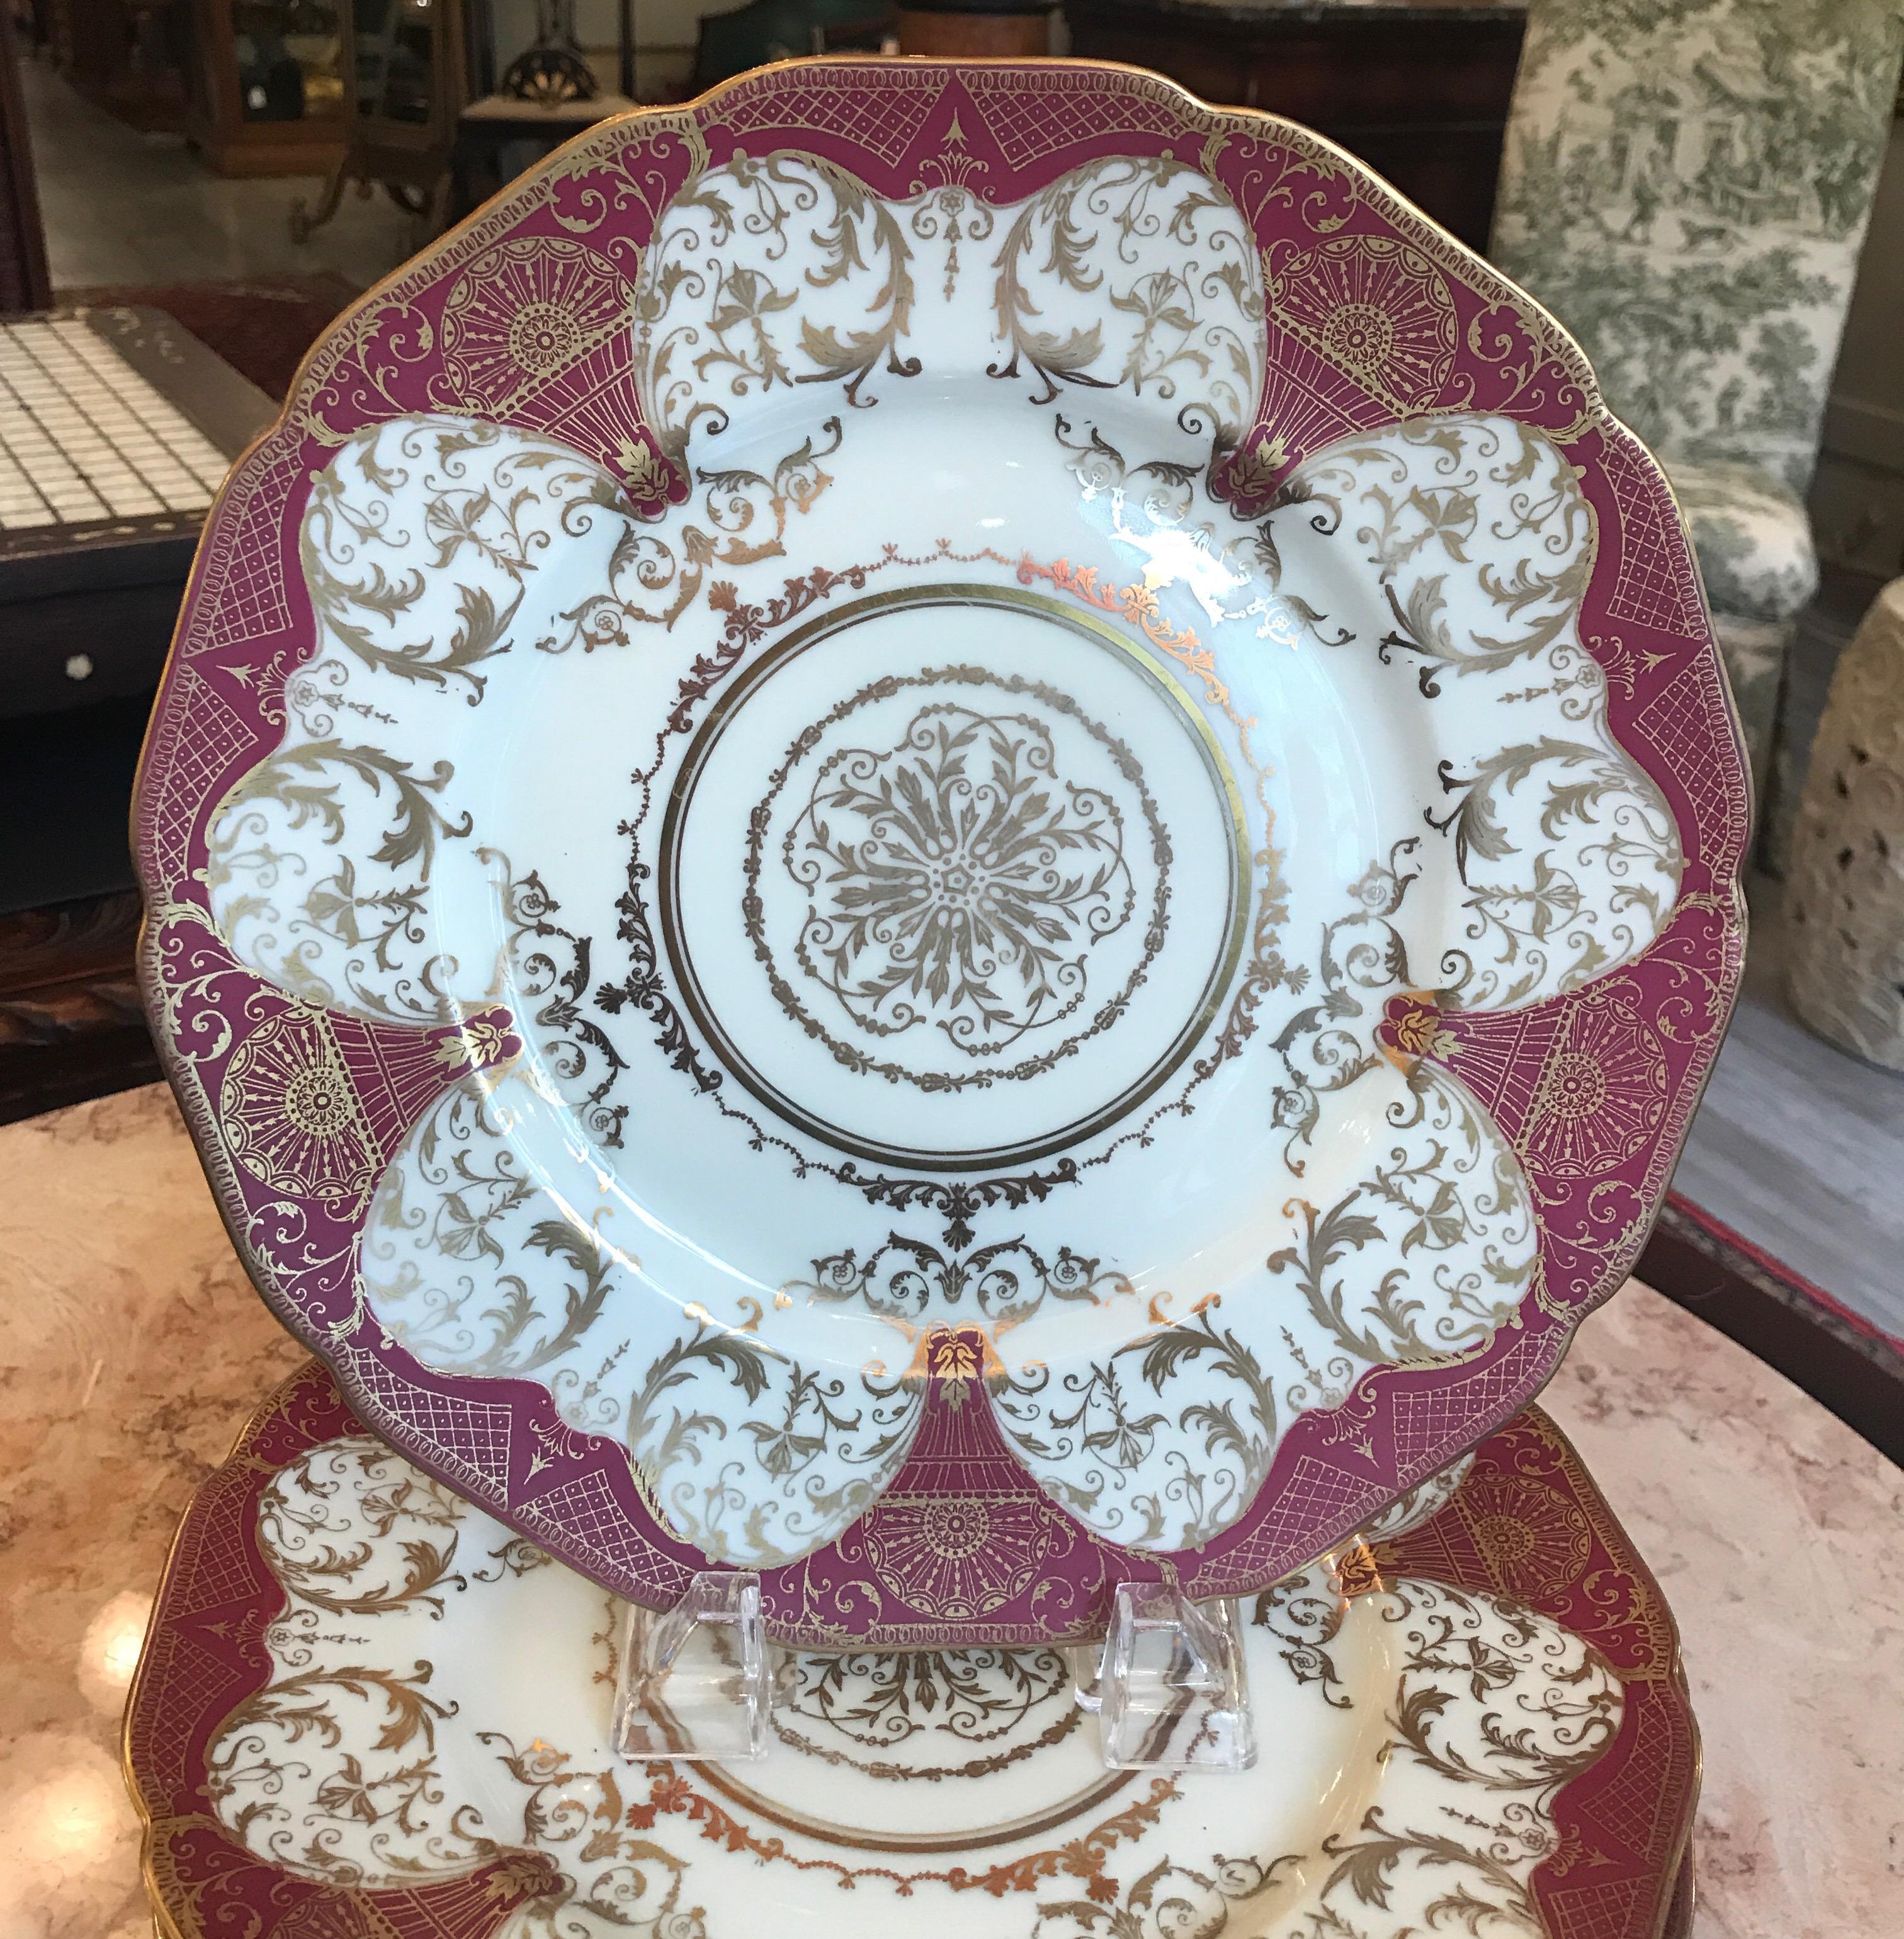 An elegant set of 12 gilt decorated service dinner plates by Black Knight, early 20th century. Unusual red clay color background with elaborate gilt overlay detail with centre medallion. Centre lacy medallion with circular gold bands around. Price